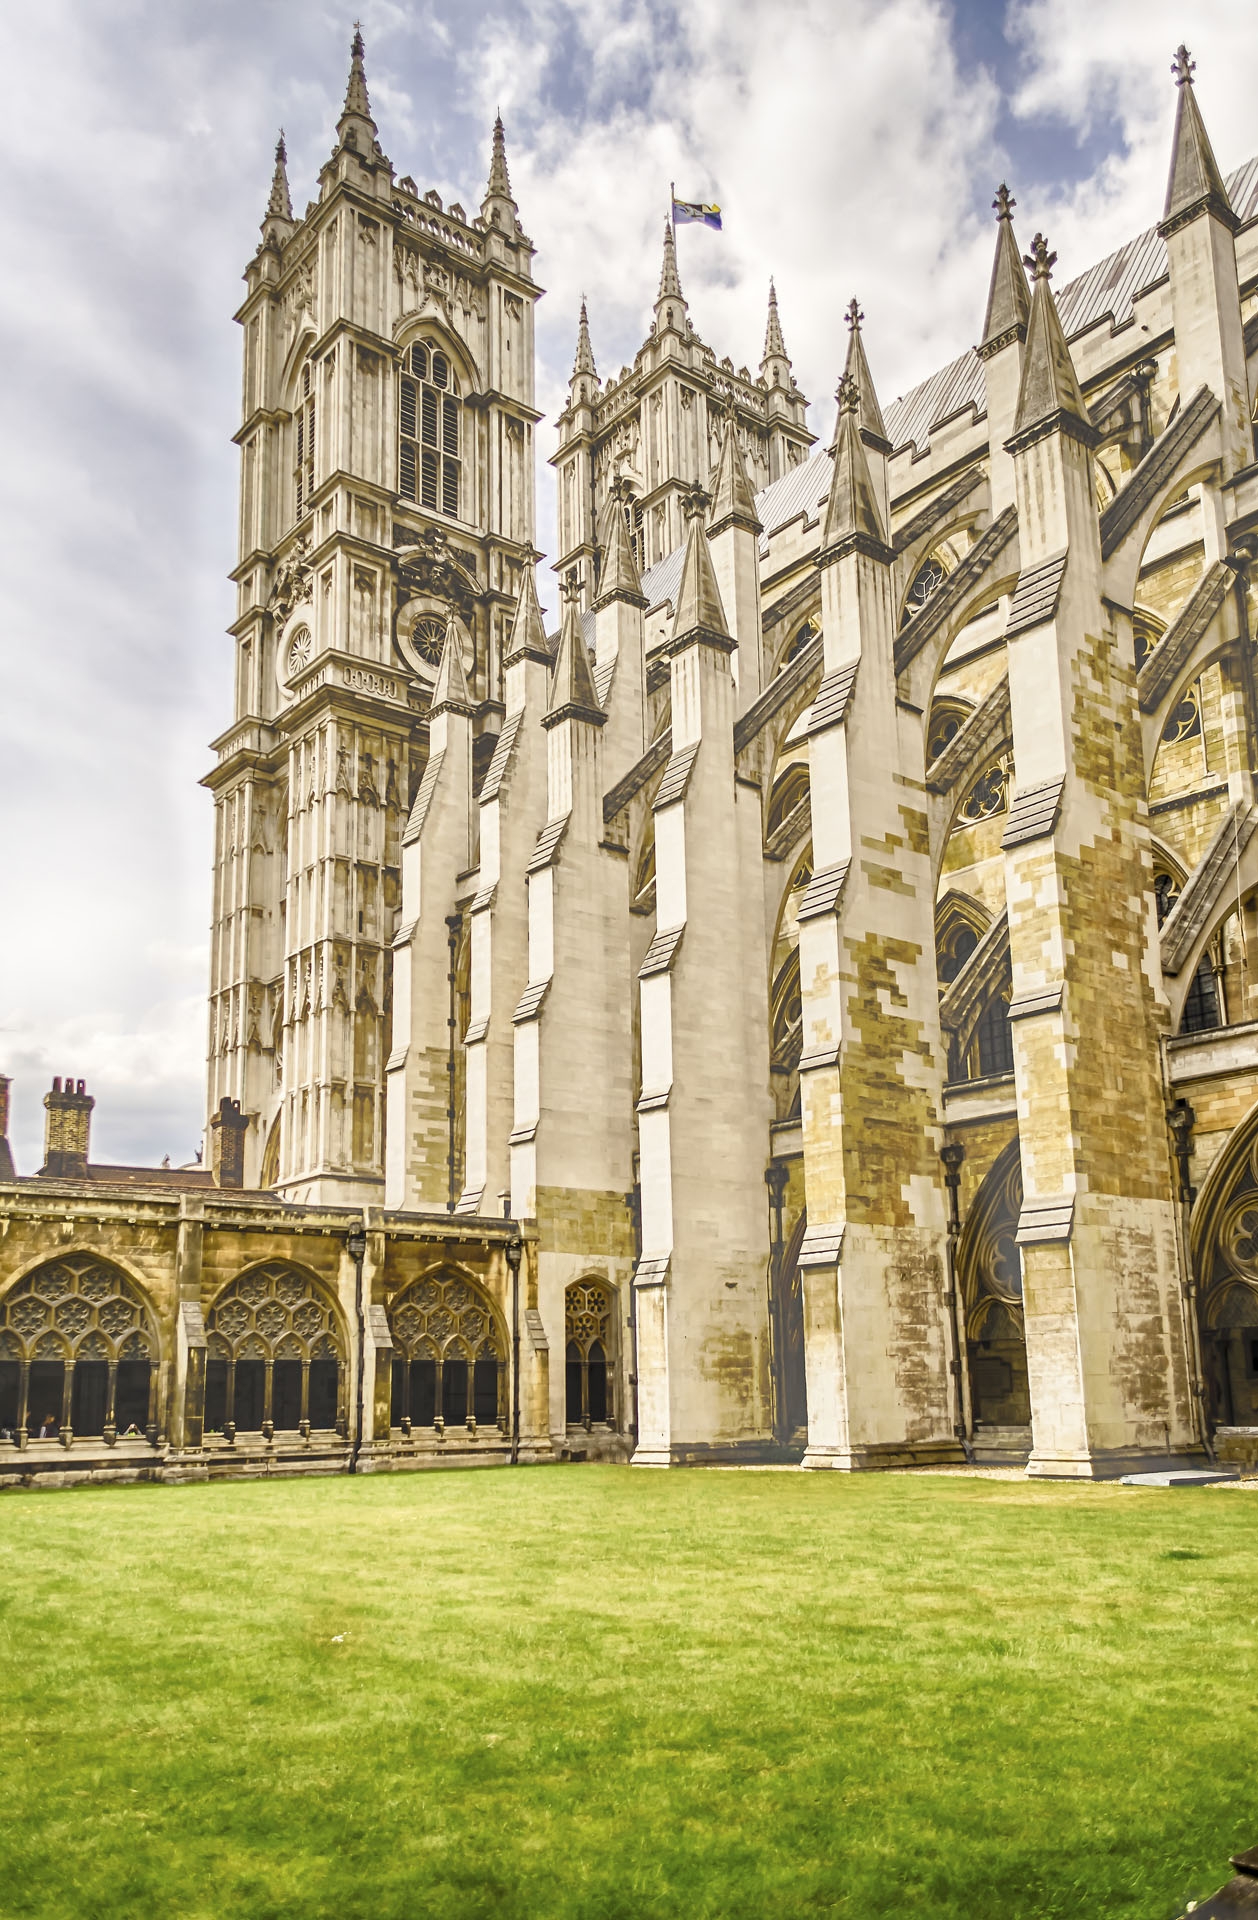 Cloister of the Westminster Abbey, London, UK